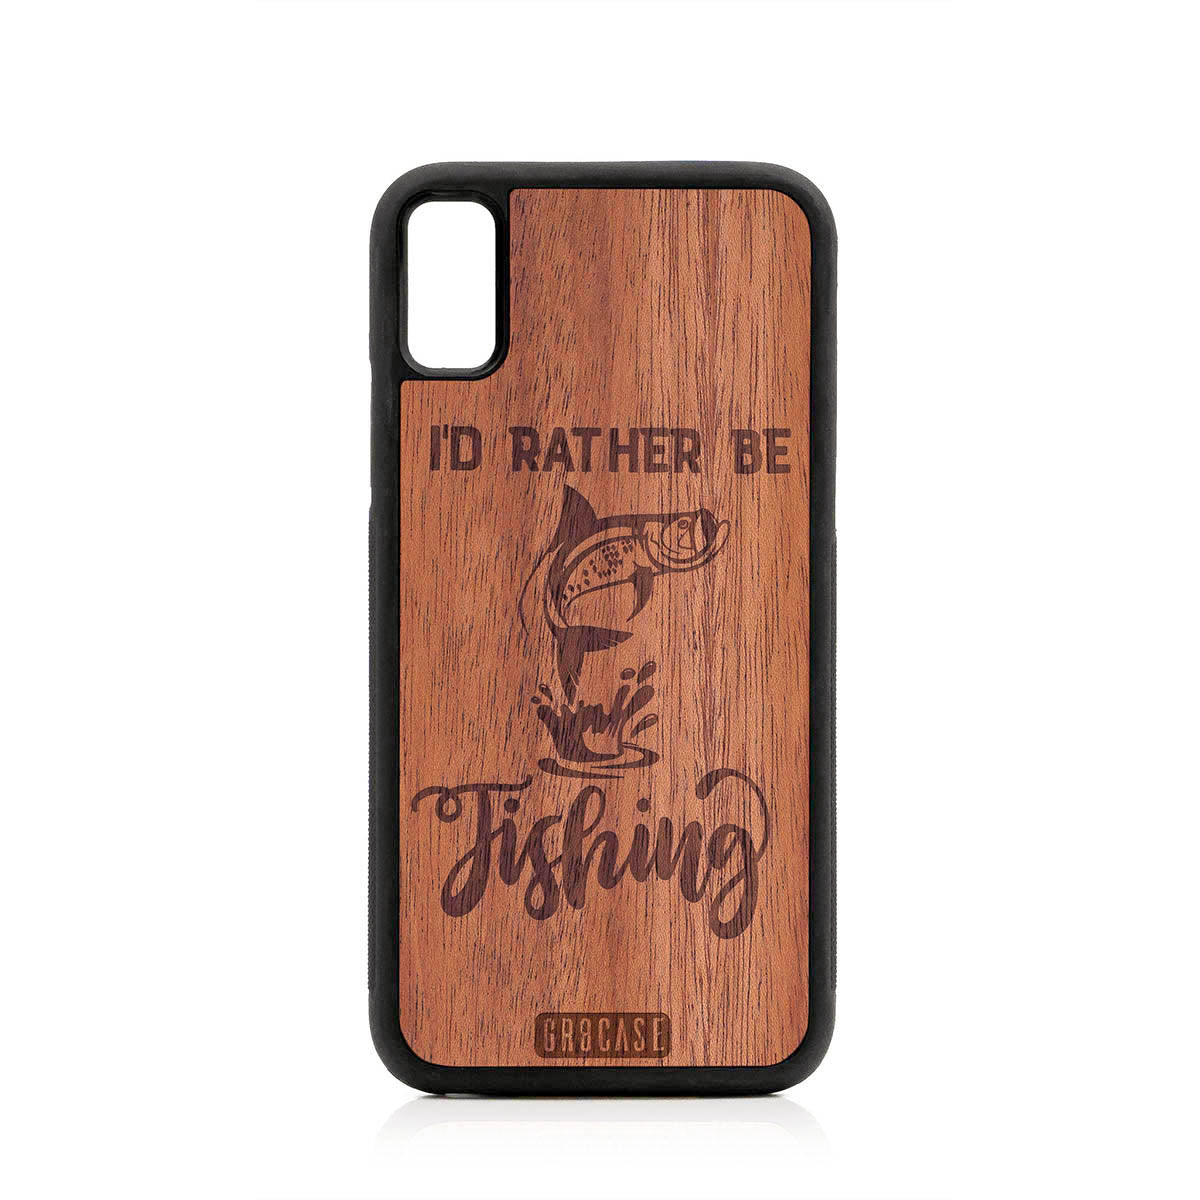 I'D Rather Be Fishing Design Wood Case For iPhone X/XS